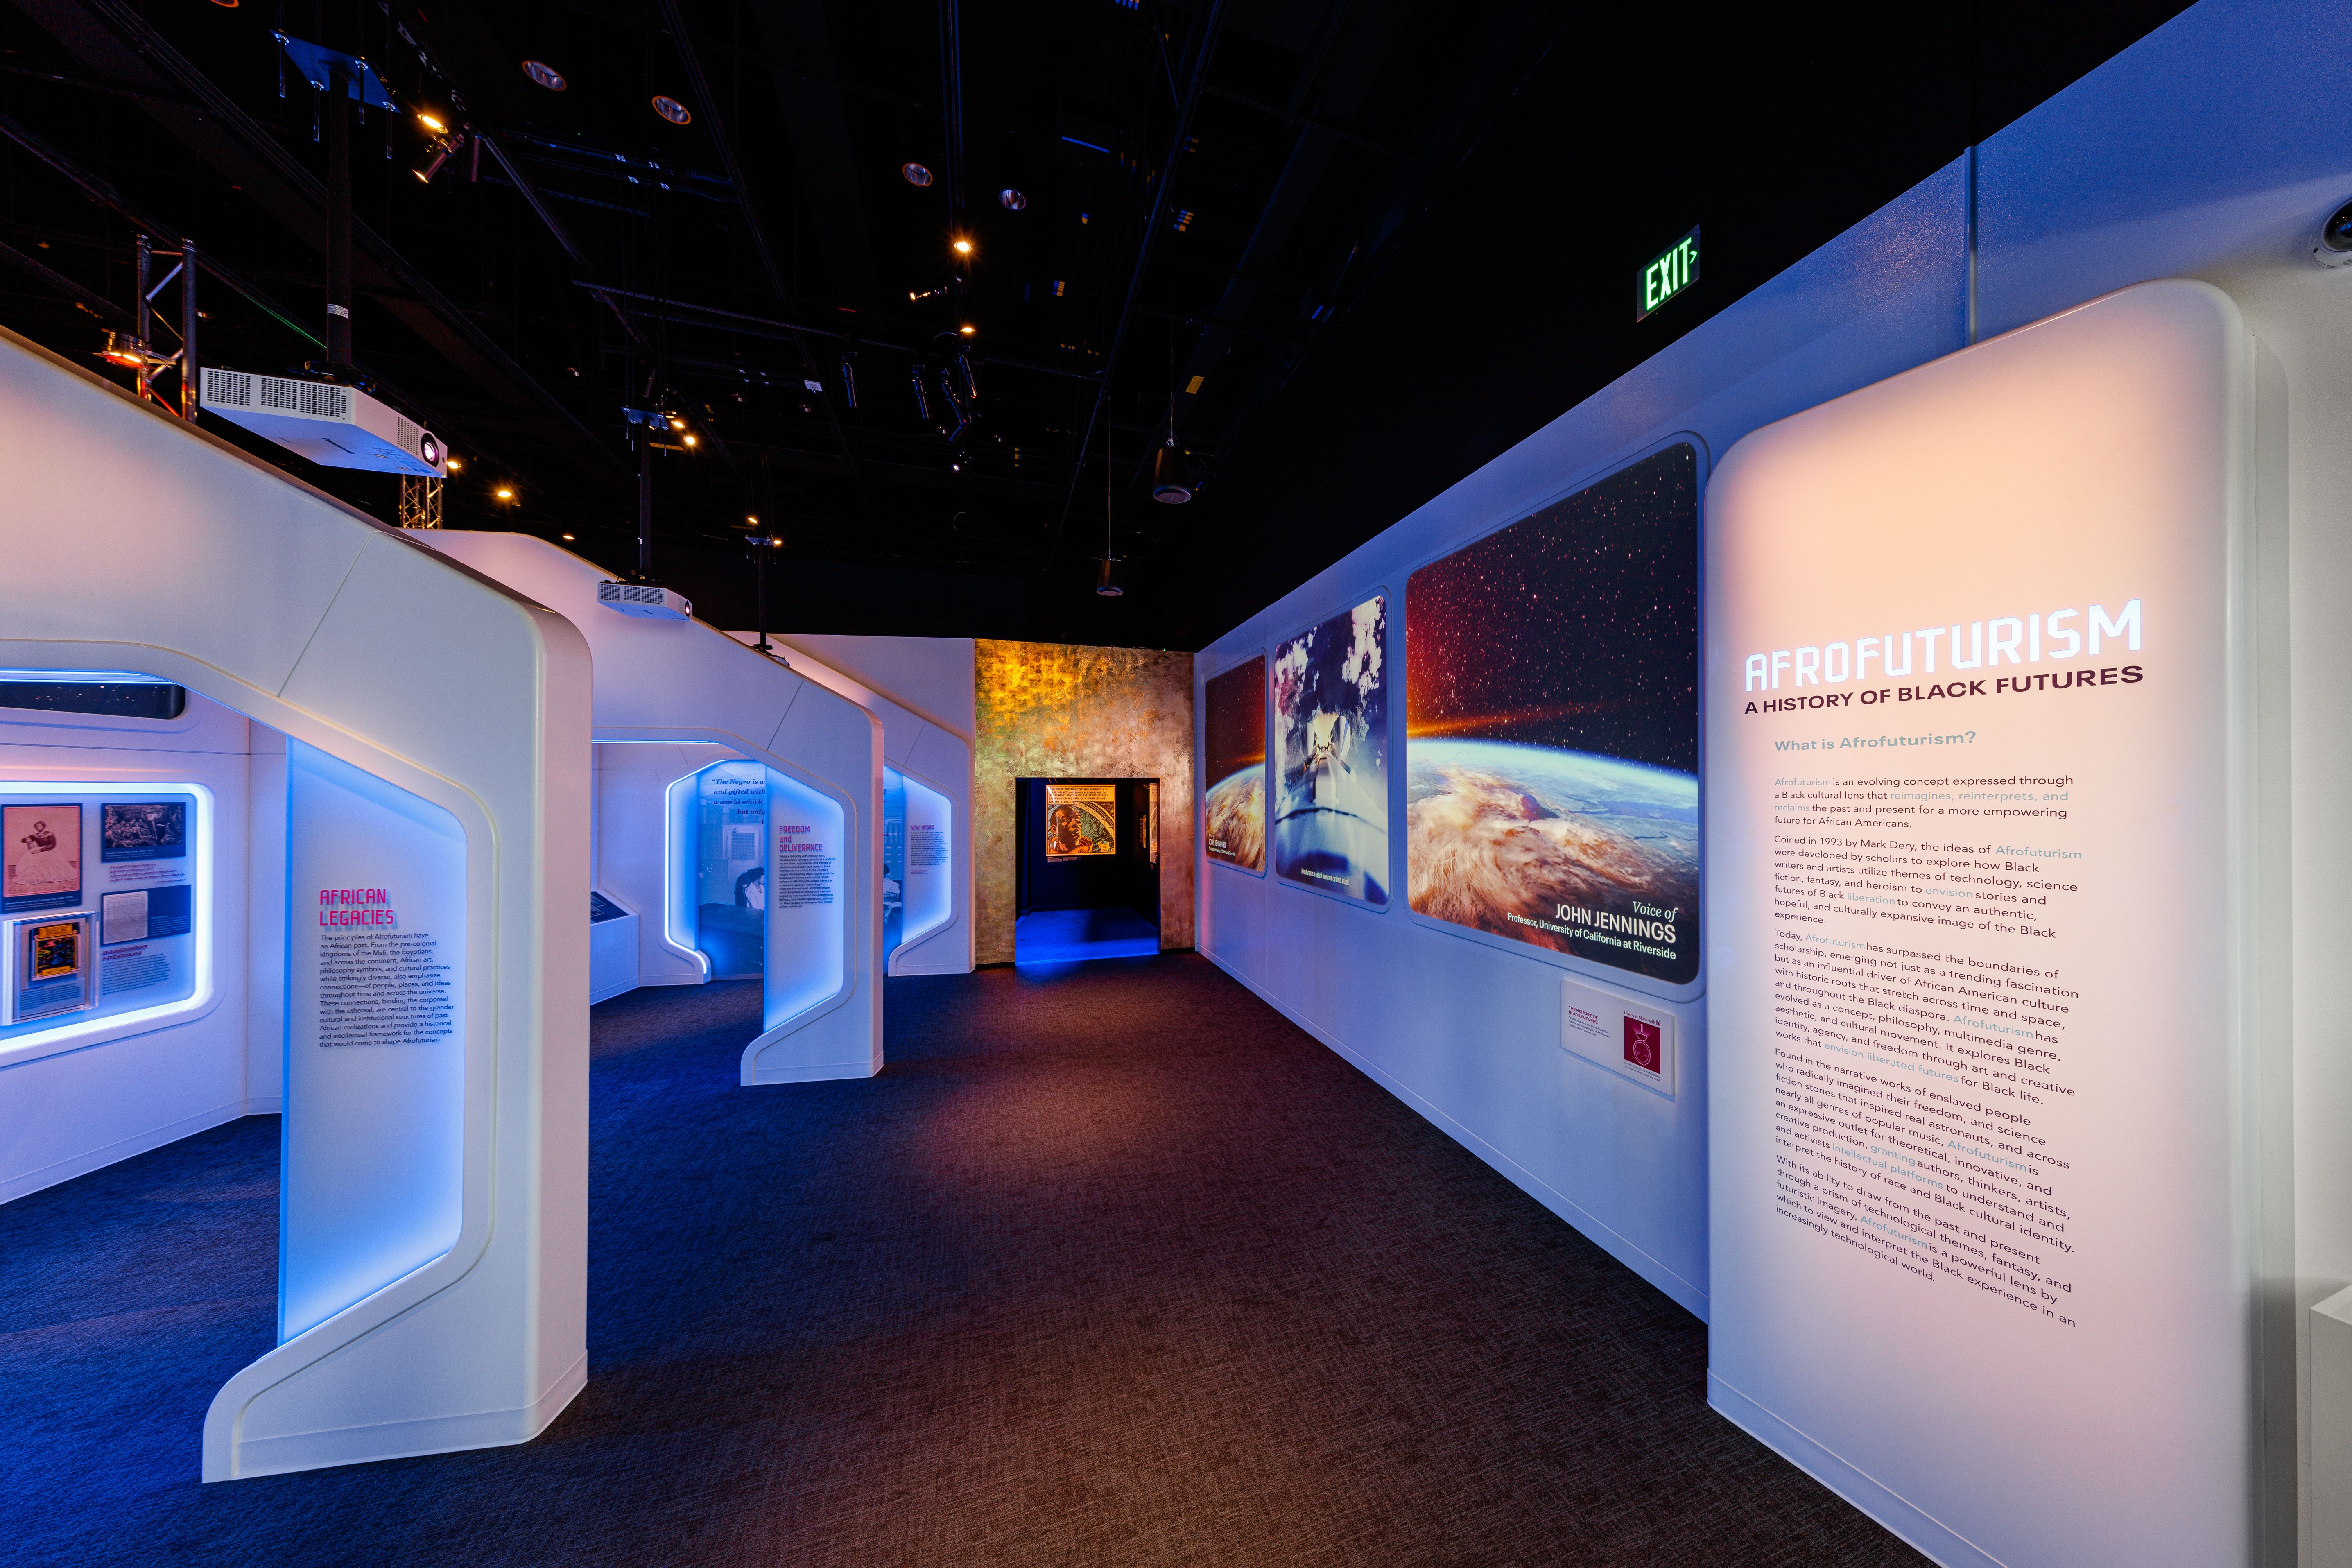 A long room with white exhibits on the side and the words AFROFUTURISM to the right